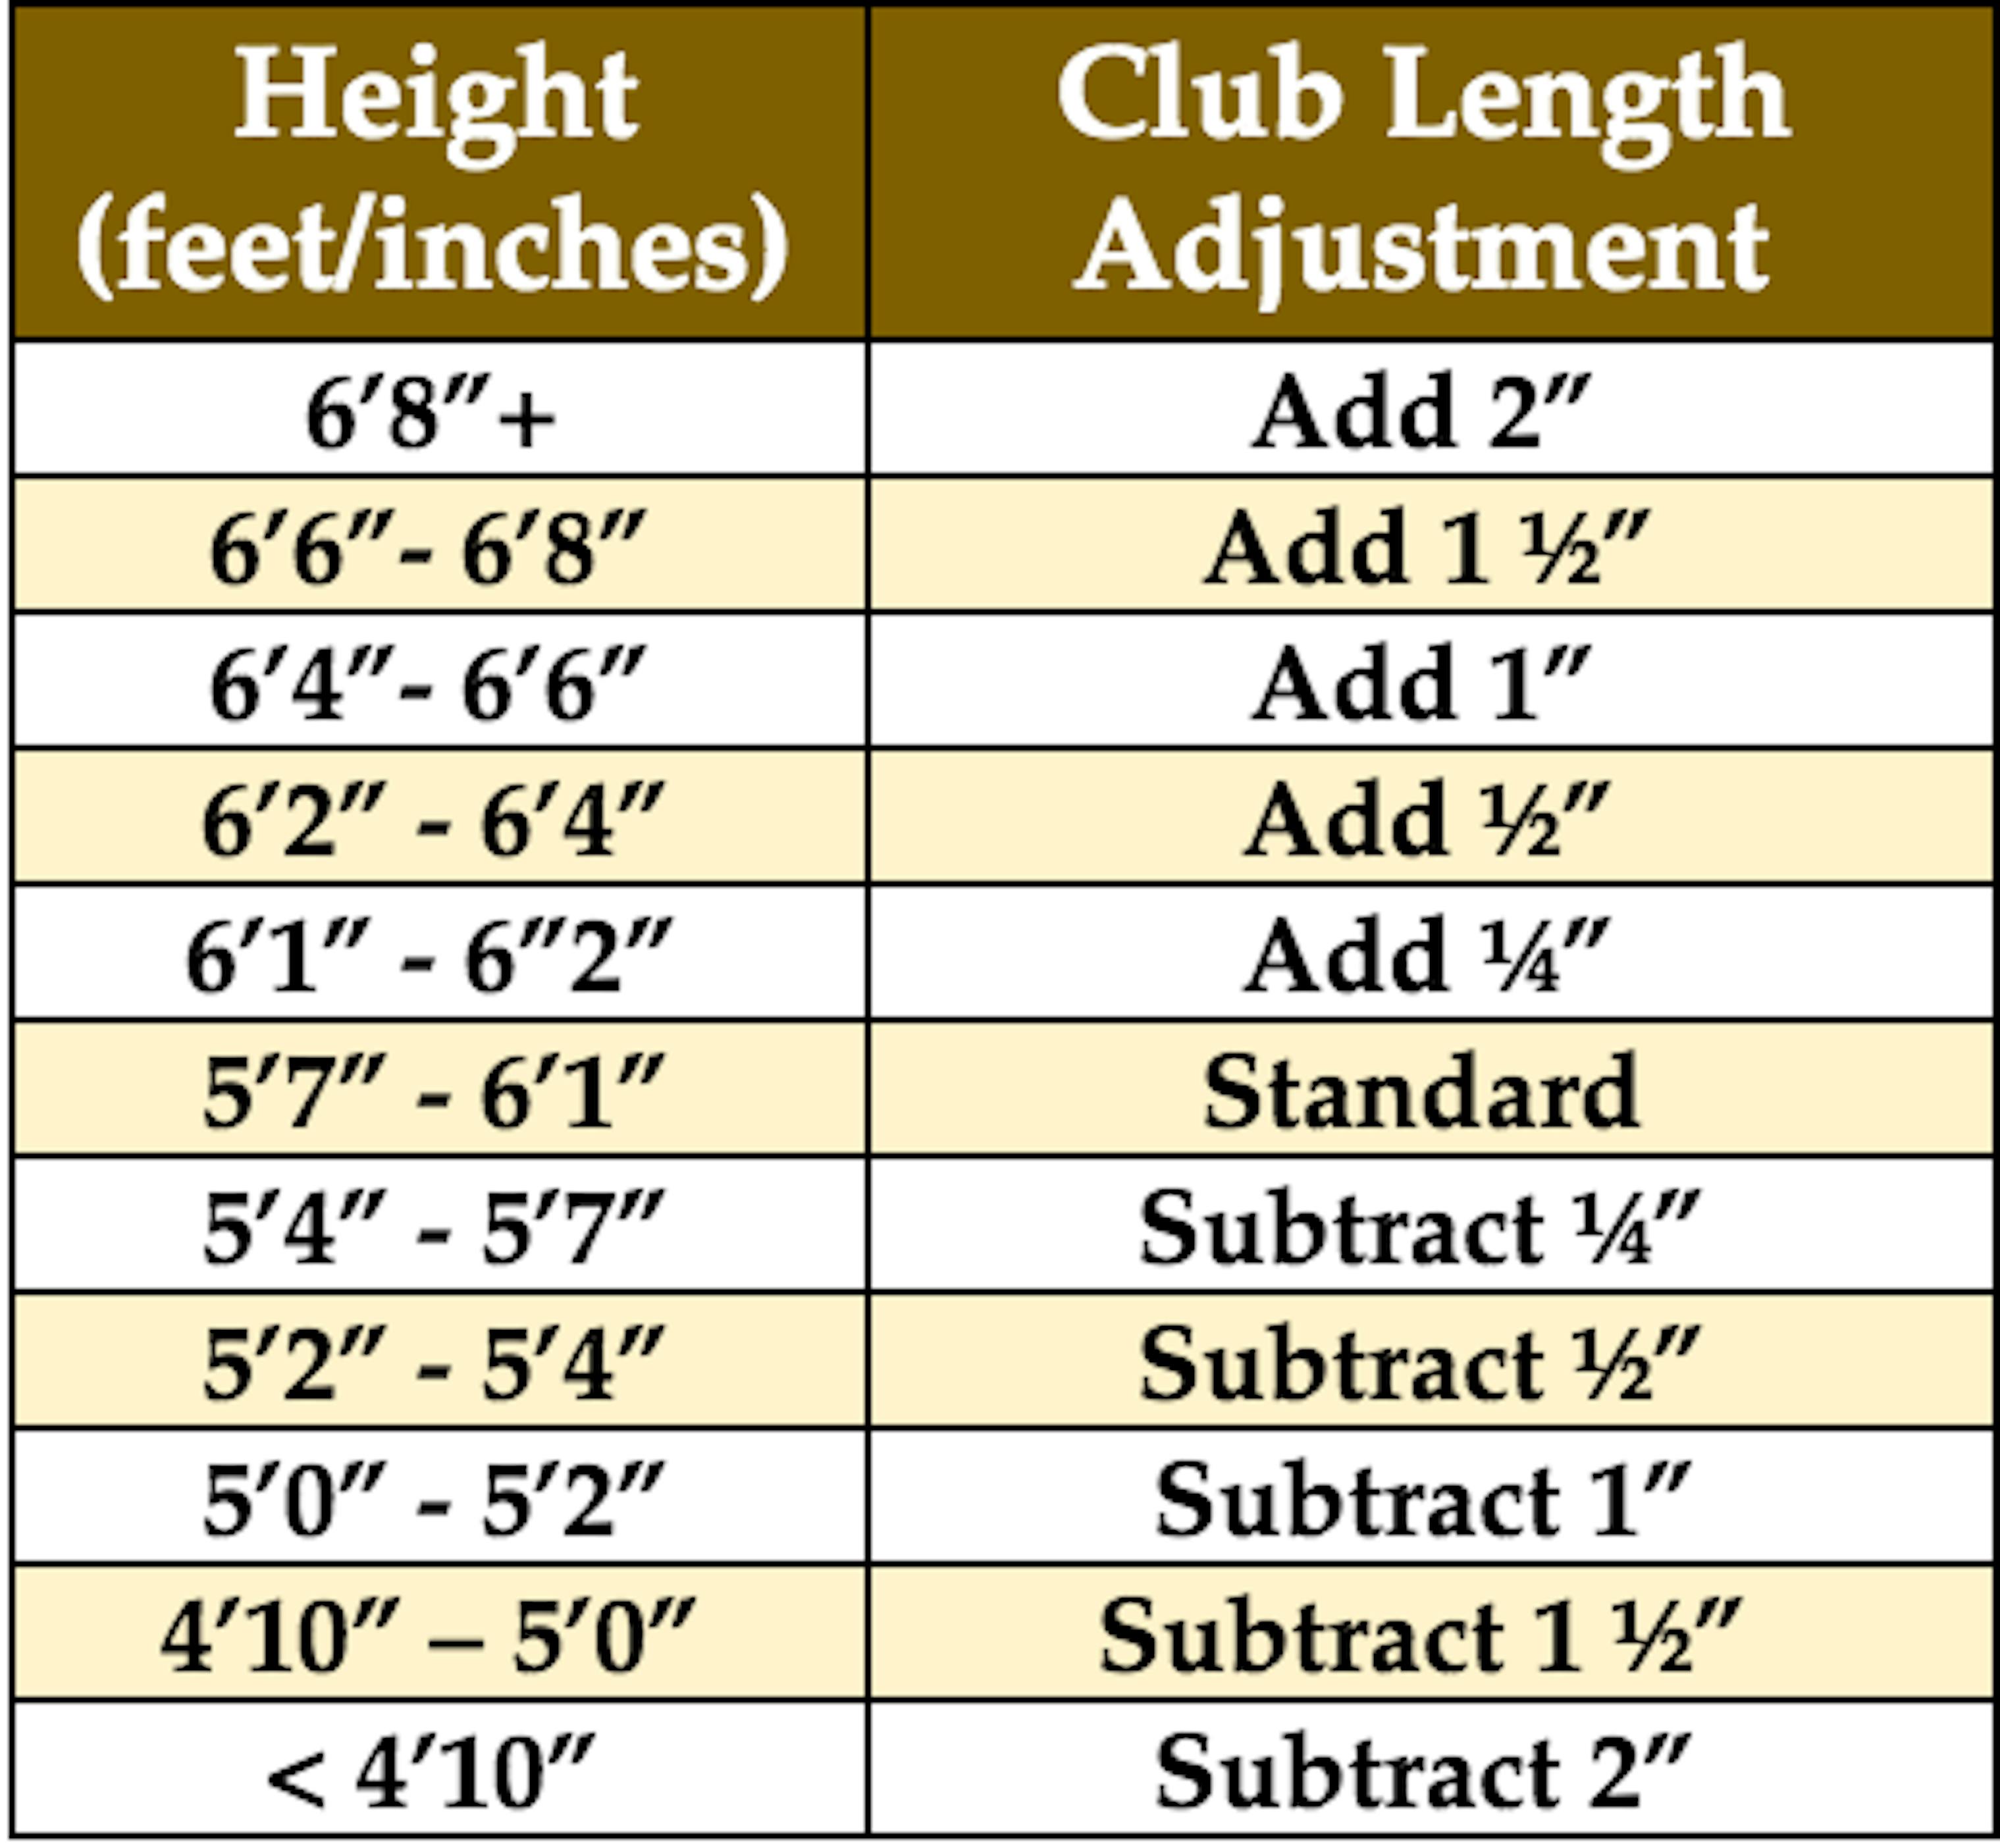 How to Determine the Right Golf Club Length